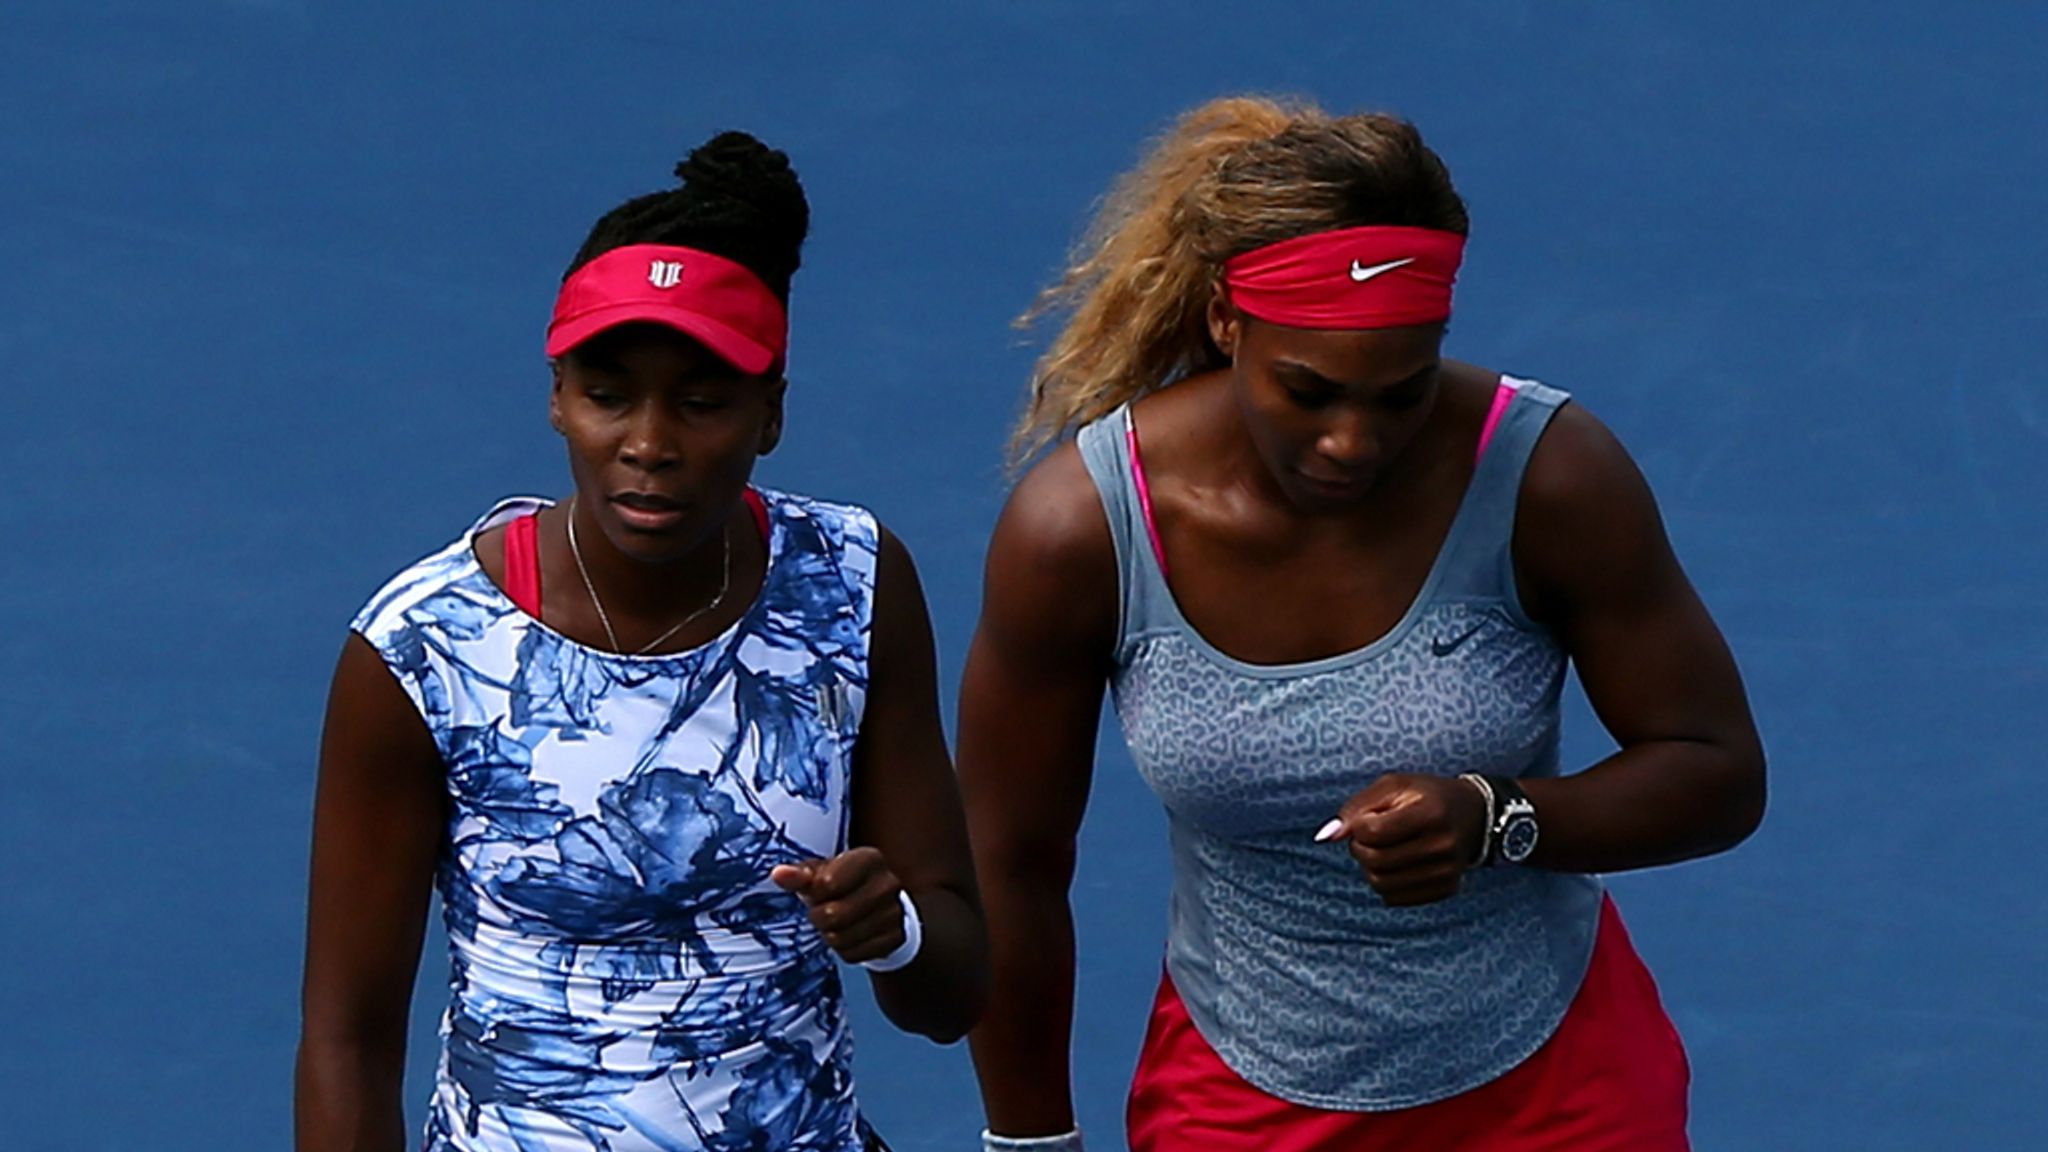 Us Open 2015 Serena And Venus Williams Take Centre Stage Tennis News Sky Sports 1269